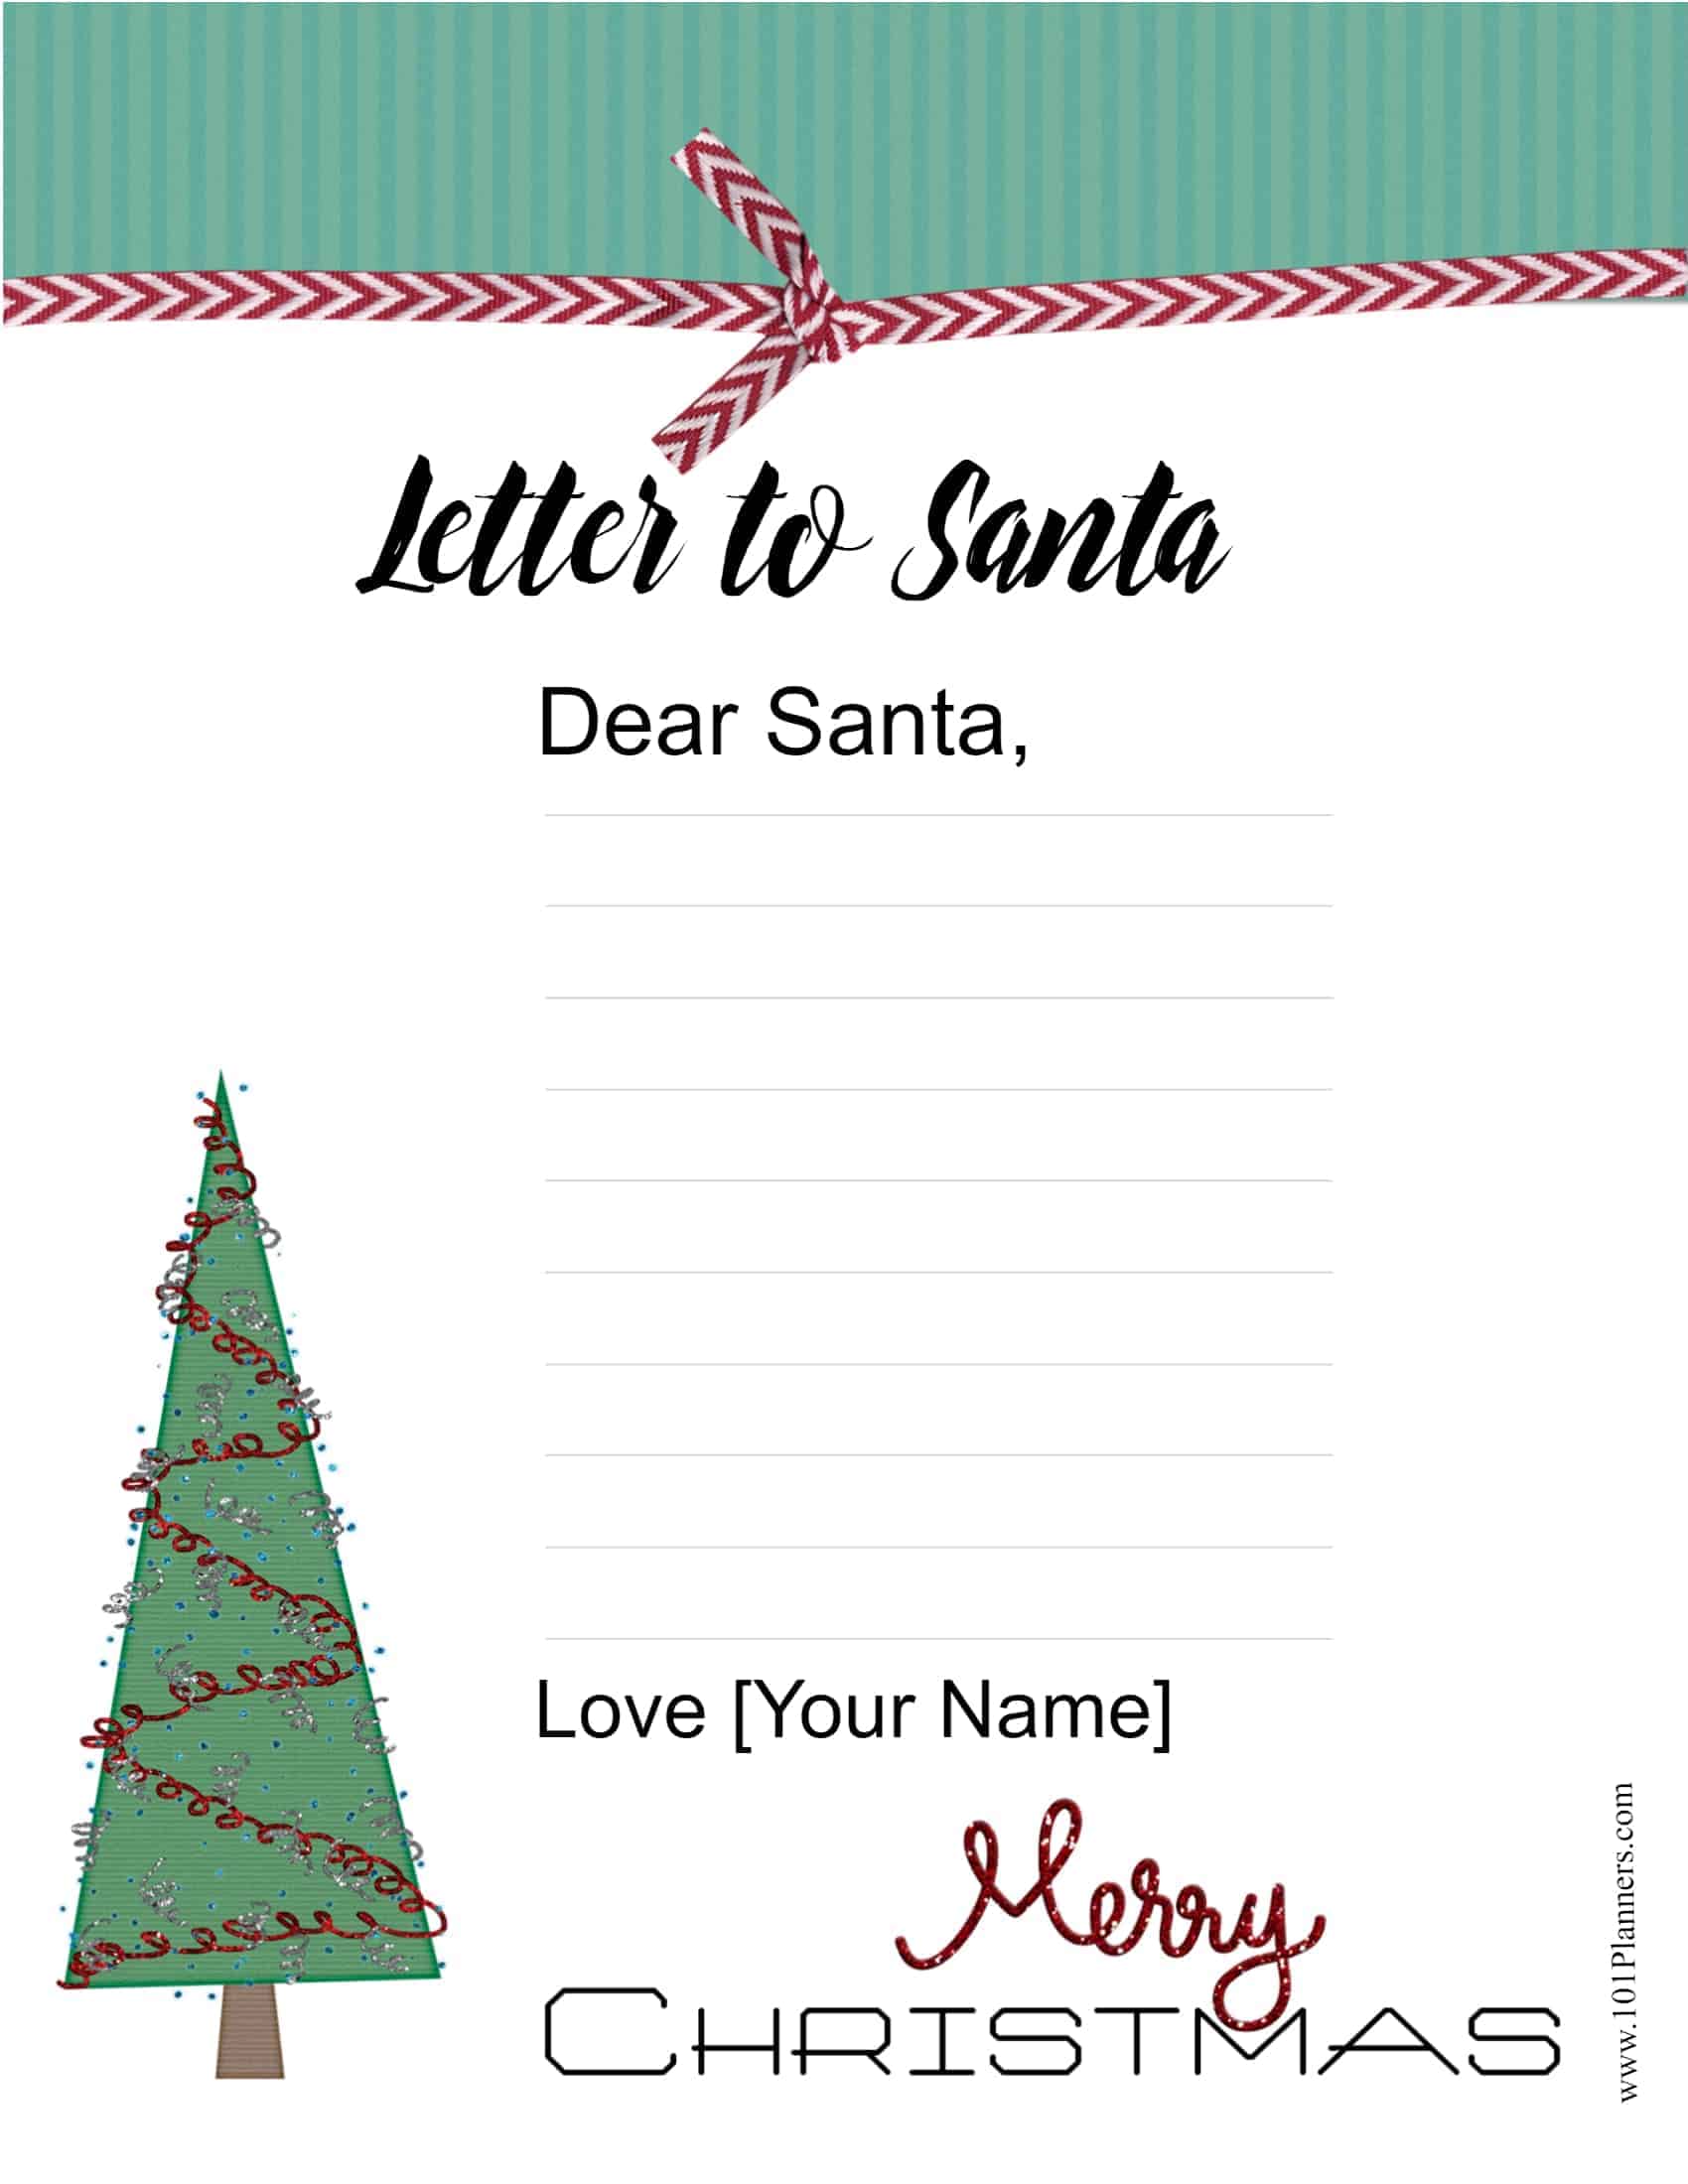 Free Letter to Santa Template | Customize Online then Print